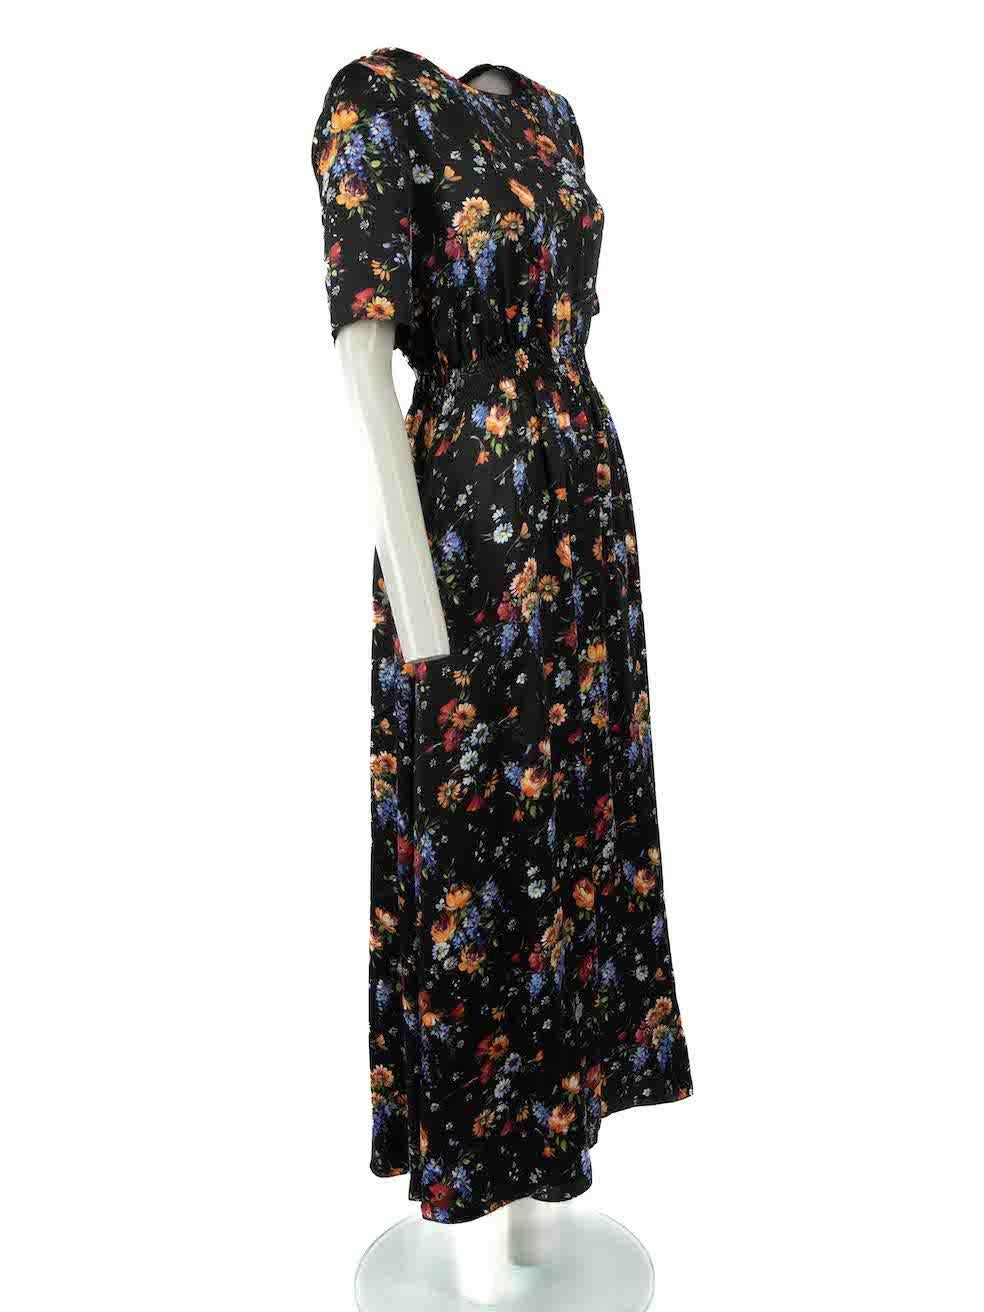 CONDITION is Very good. Hardly any visible wear to dress is evident on this used Adam Lippes designer resale item.
 
Details
Black
Silk
Maxi dress
Floral print pattern
Round neckline
Elasticated waistband
Back button closure
 
Made in USA
